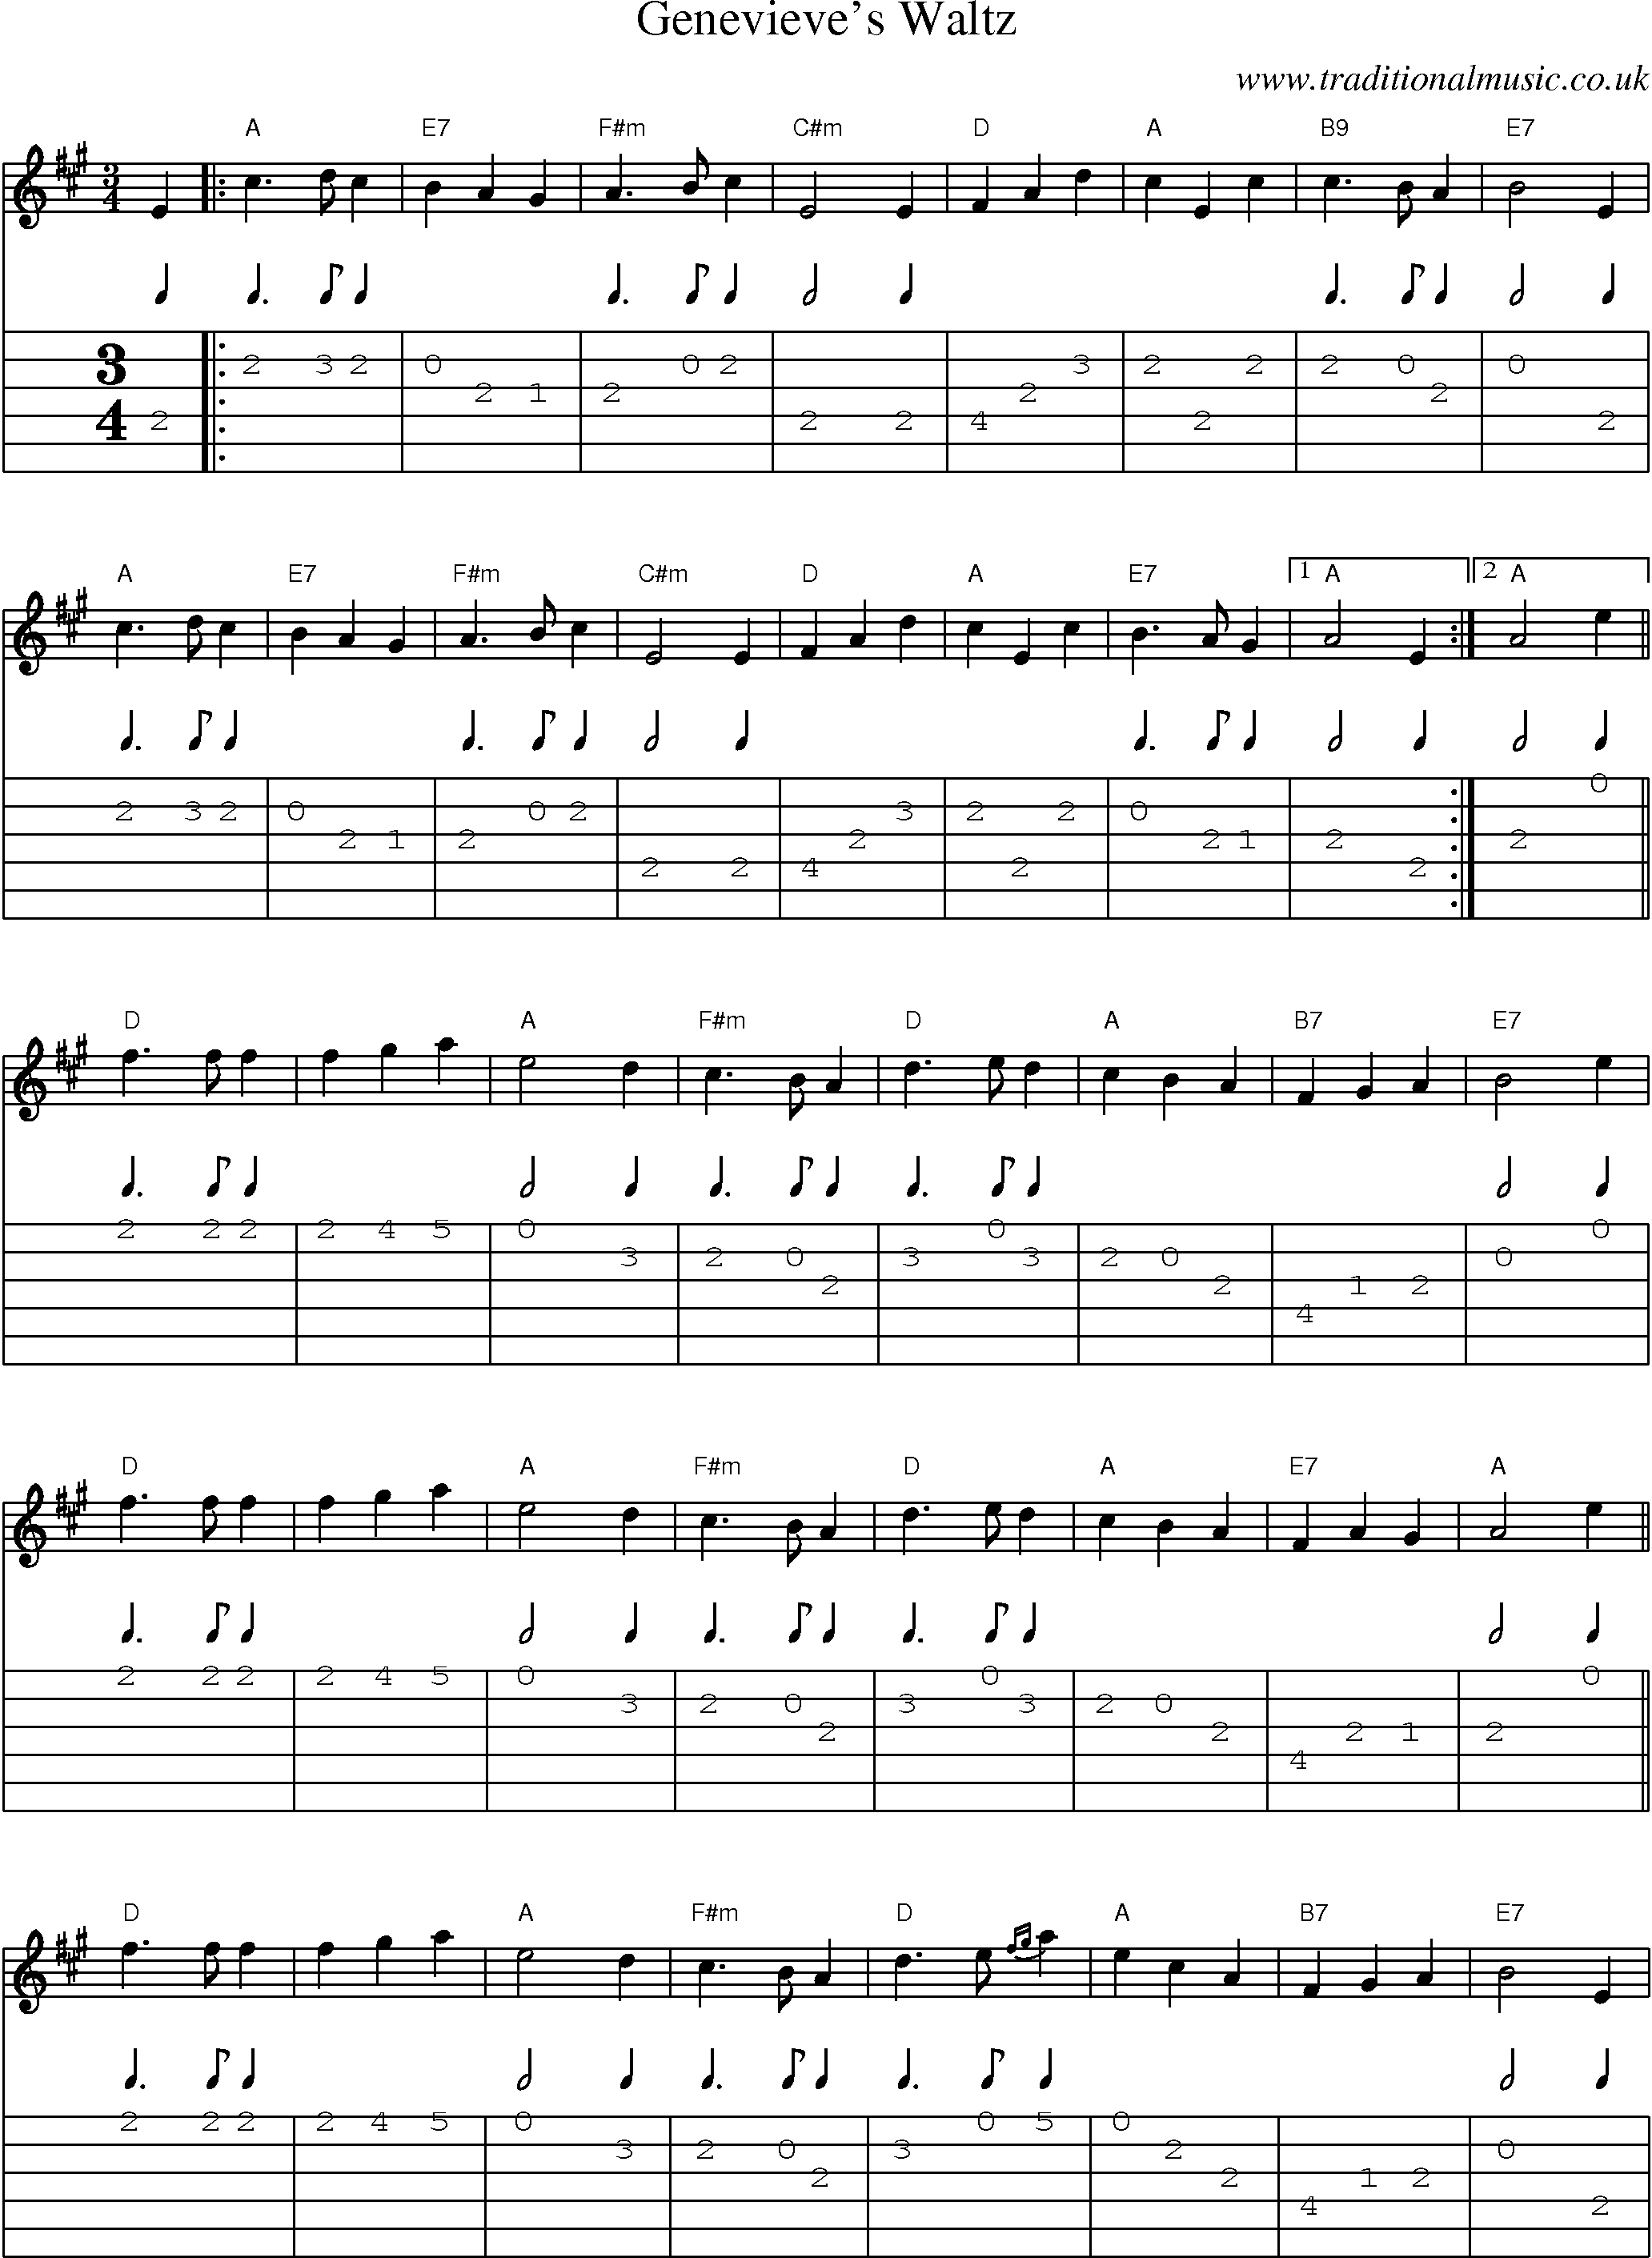 Music Score and Guitar Tabs for Genevieves Waltz